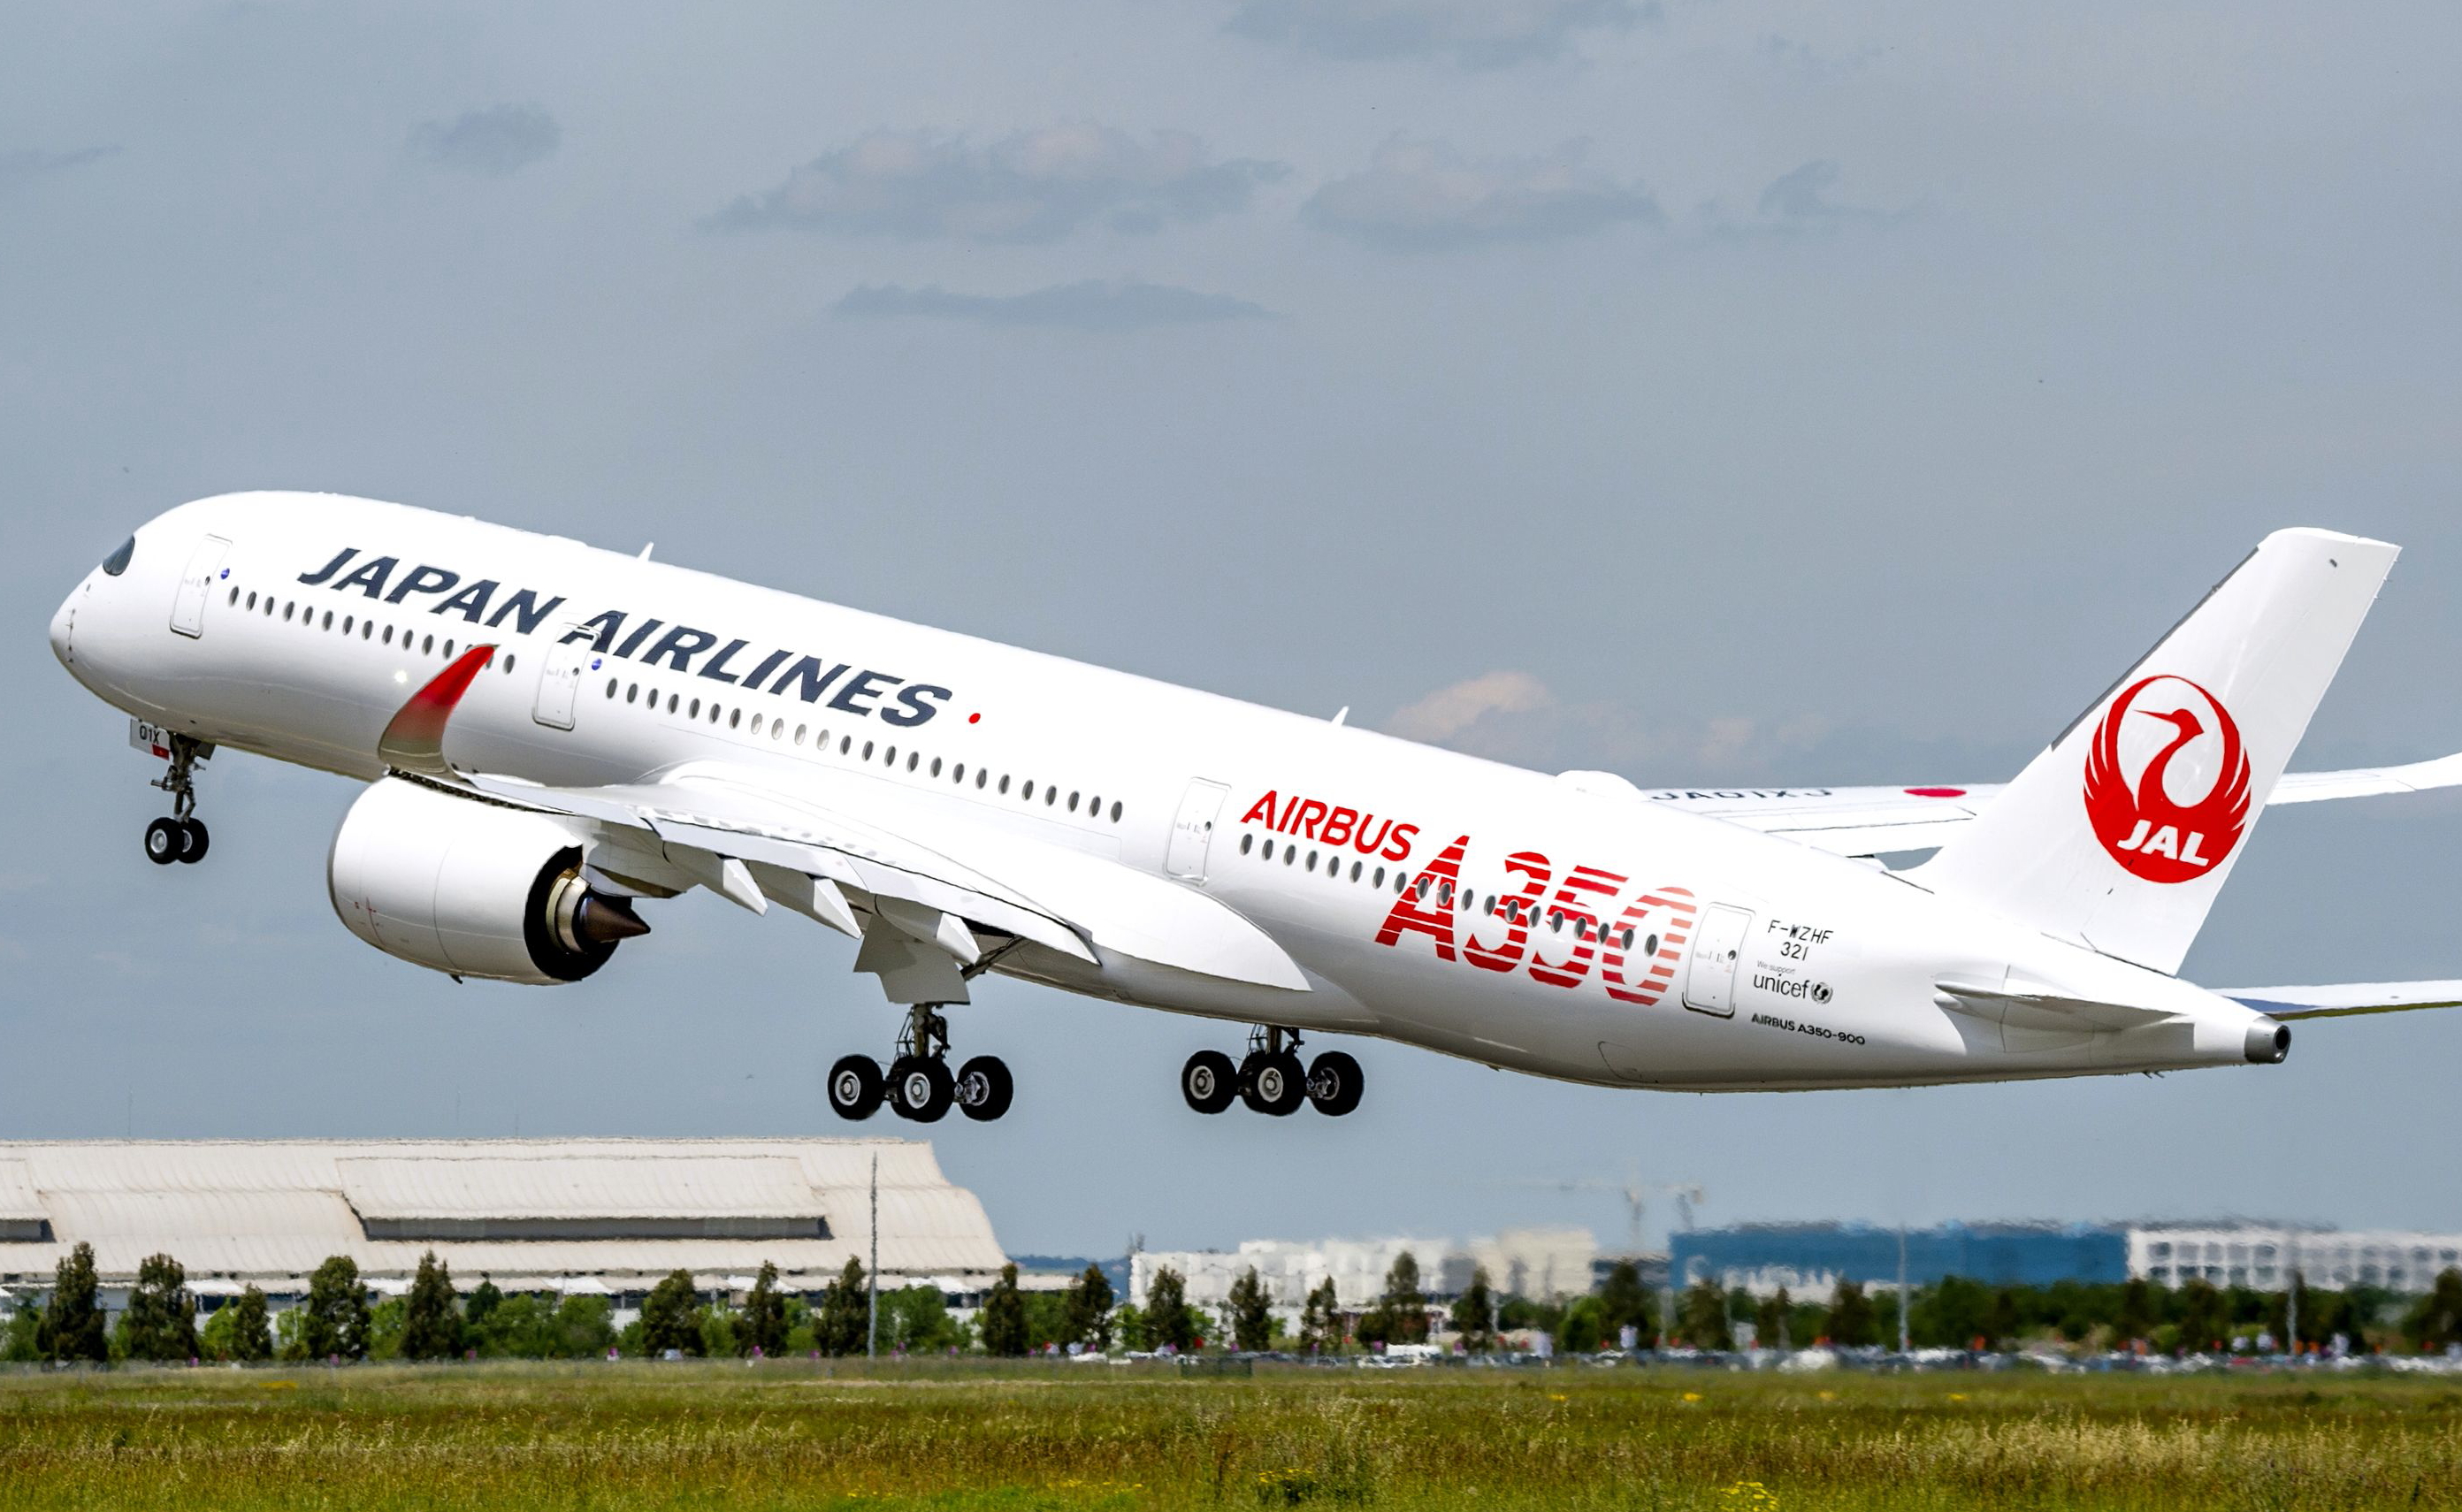 Japan Airlines Airbus A350-900. Click to enlarge.